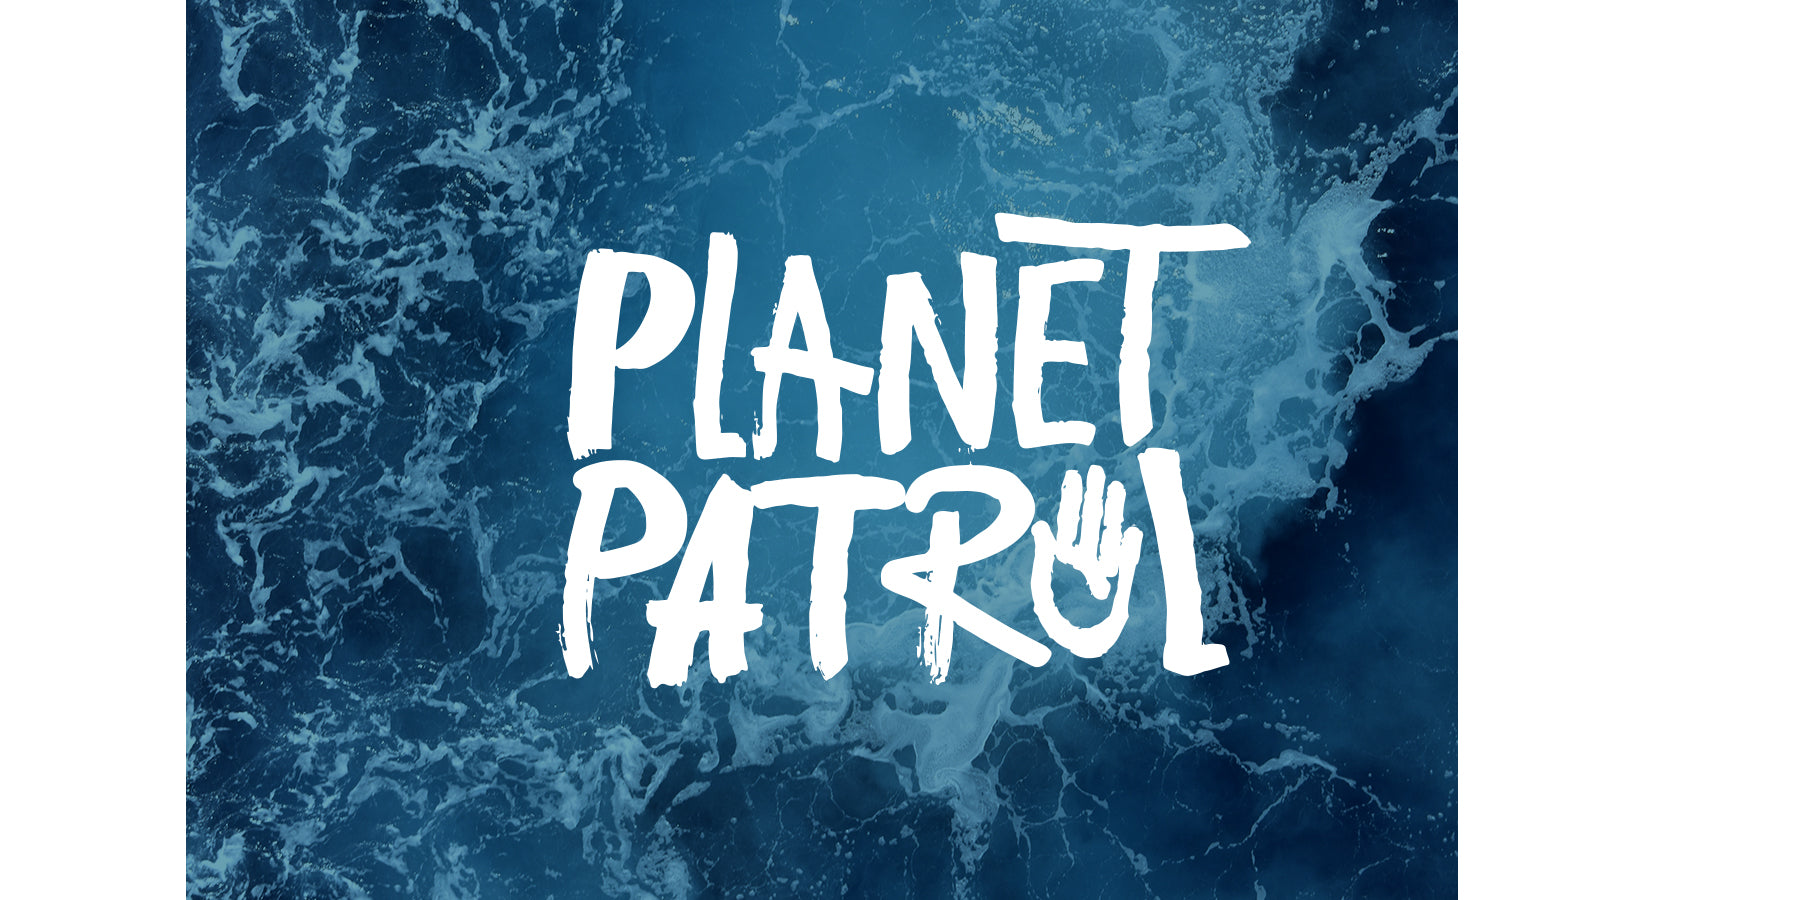 Our Partnership with Planet Patrol.